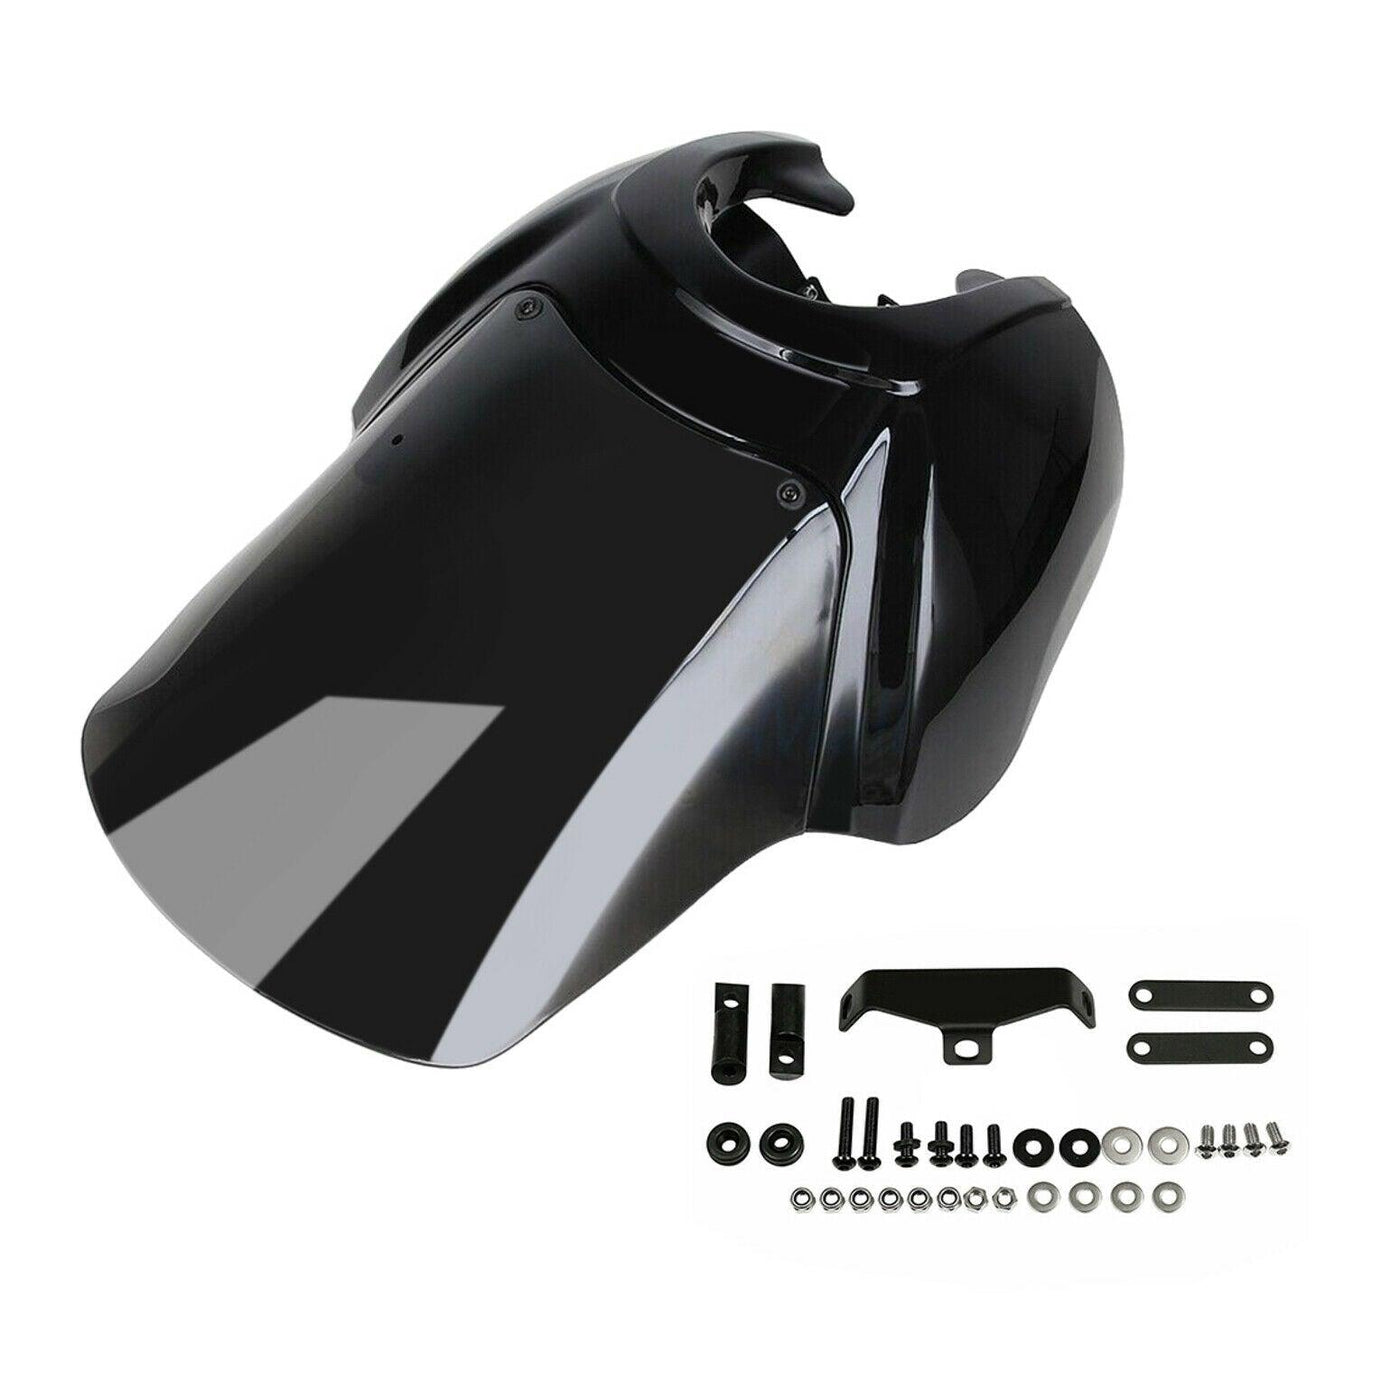 Front Fairing With 15" Black Windshield Fit for Harley Dyna Super Glide 06-17 - Moto Life Products